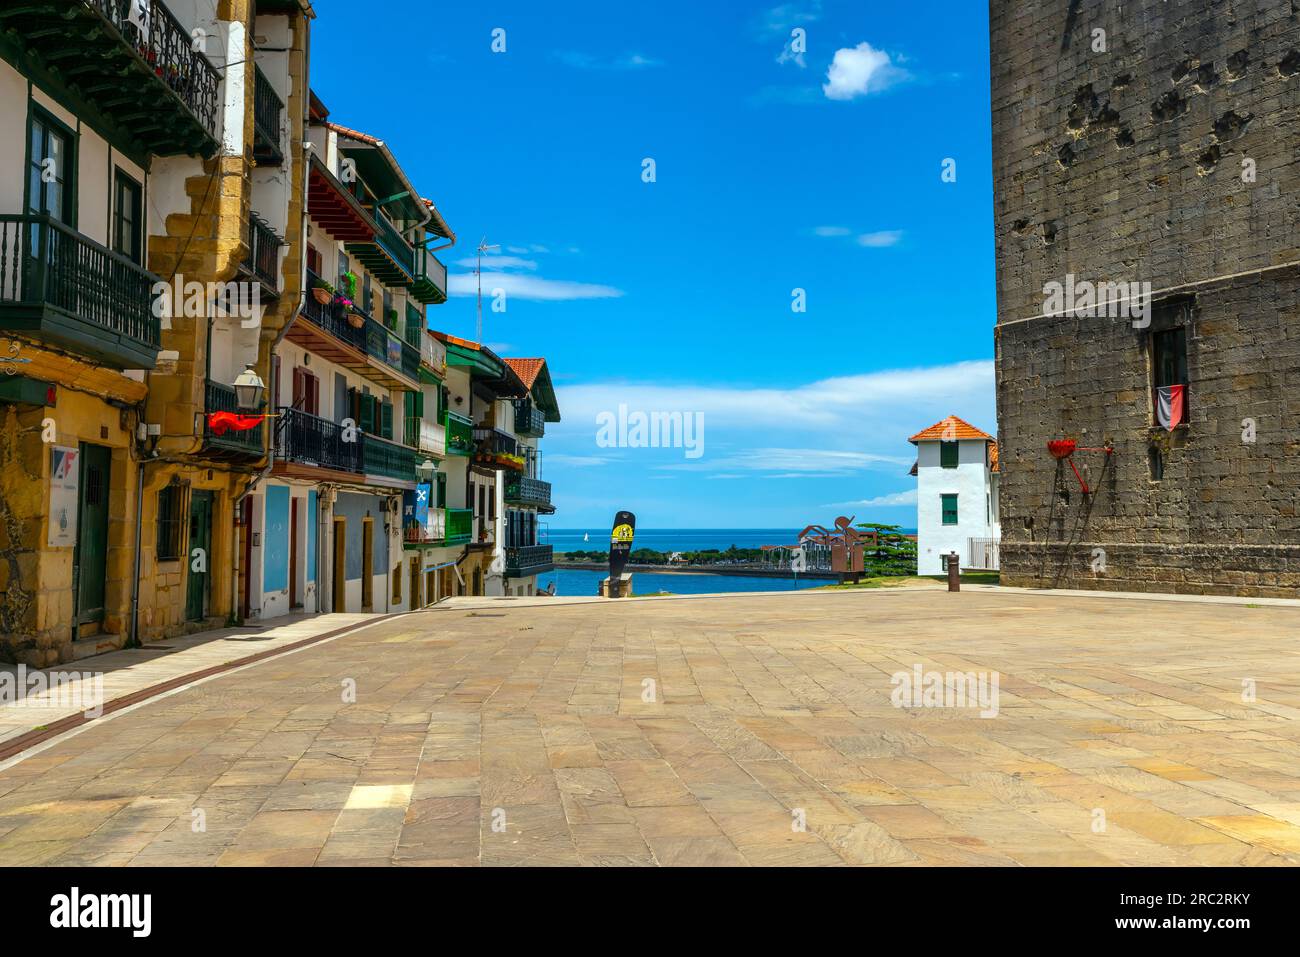 Picturesque half-timbered houses and architecture of Hondarribia old town, Basque country, Spain. Stock Photo